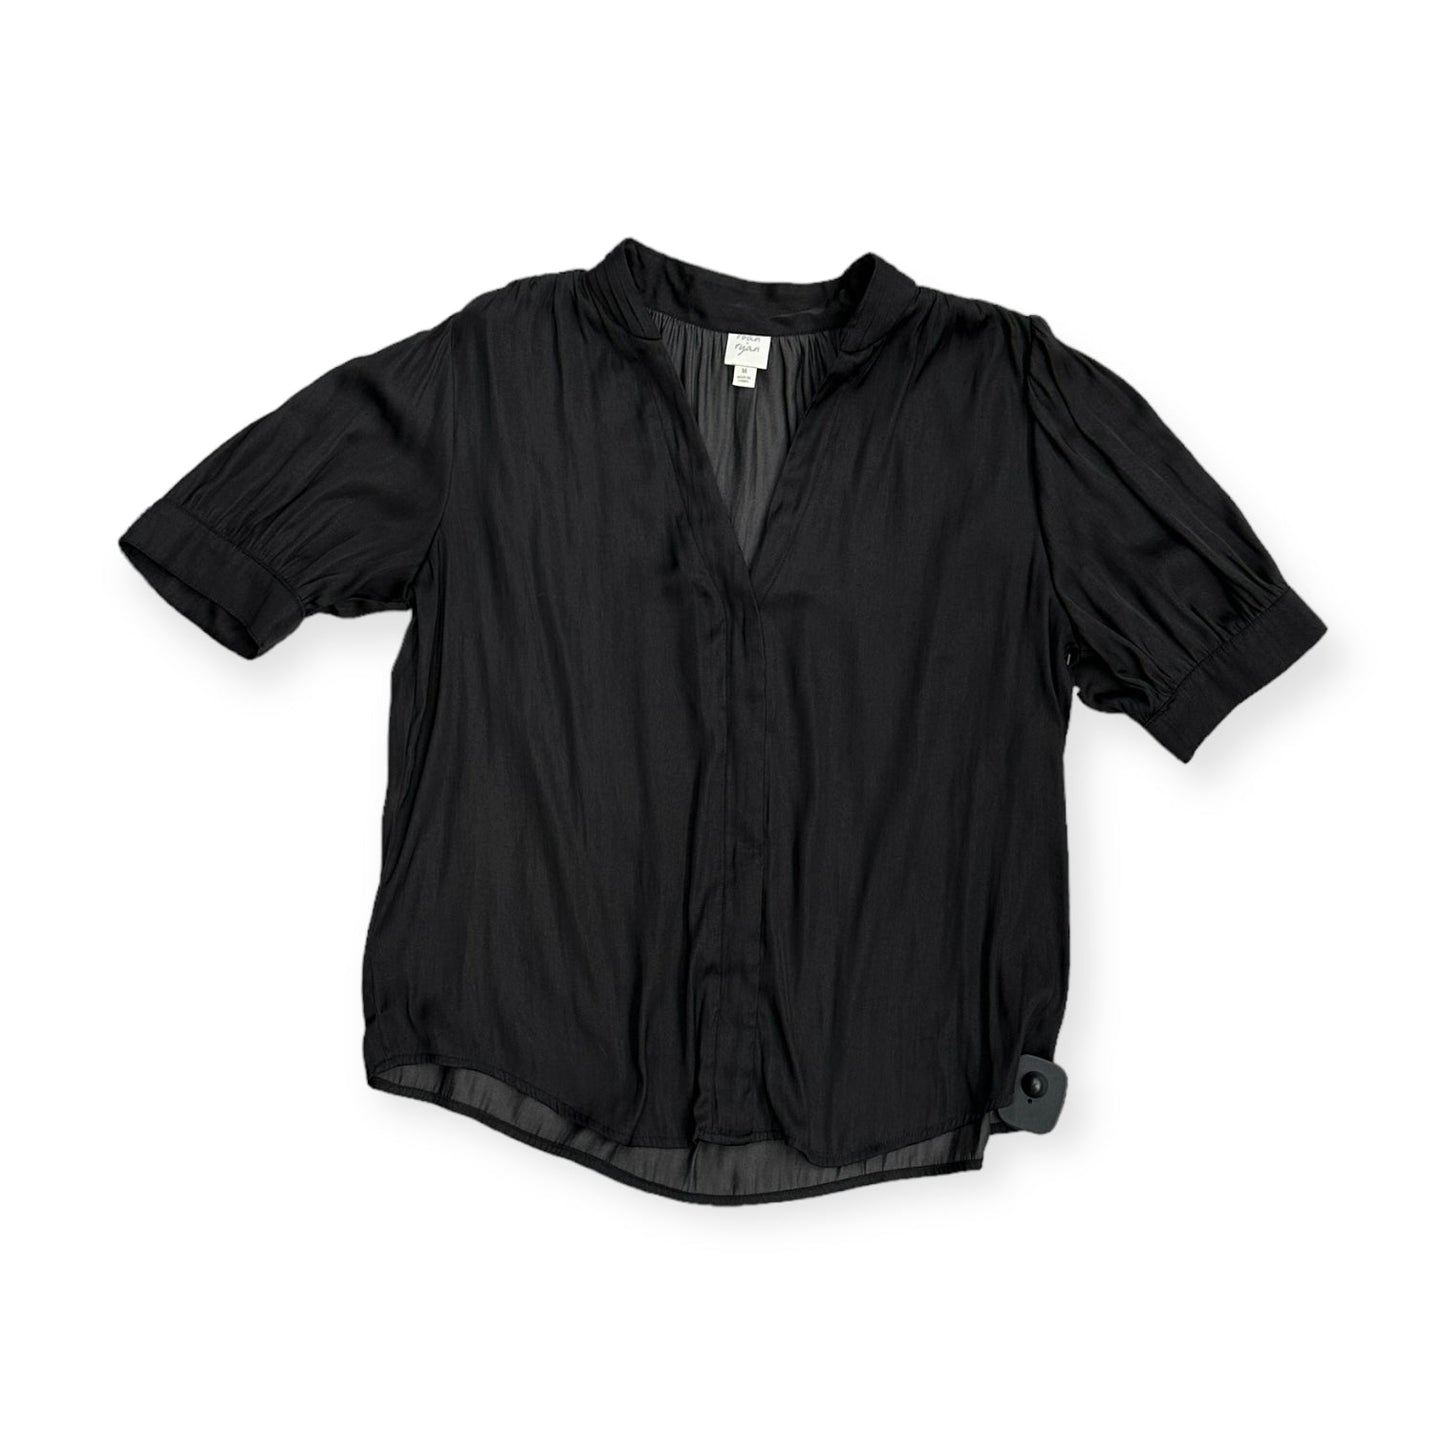 Black Top Short Sleeve Clothes Mentor, Size M